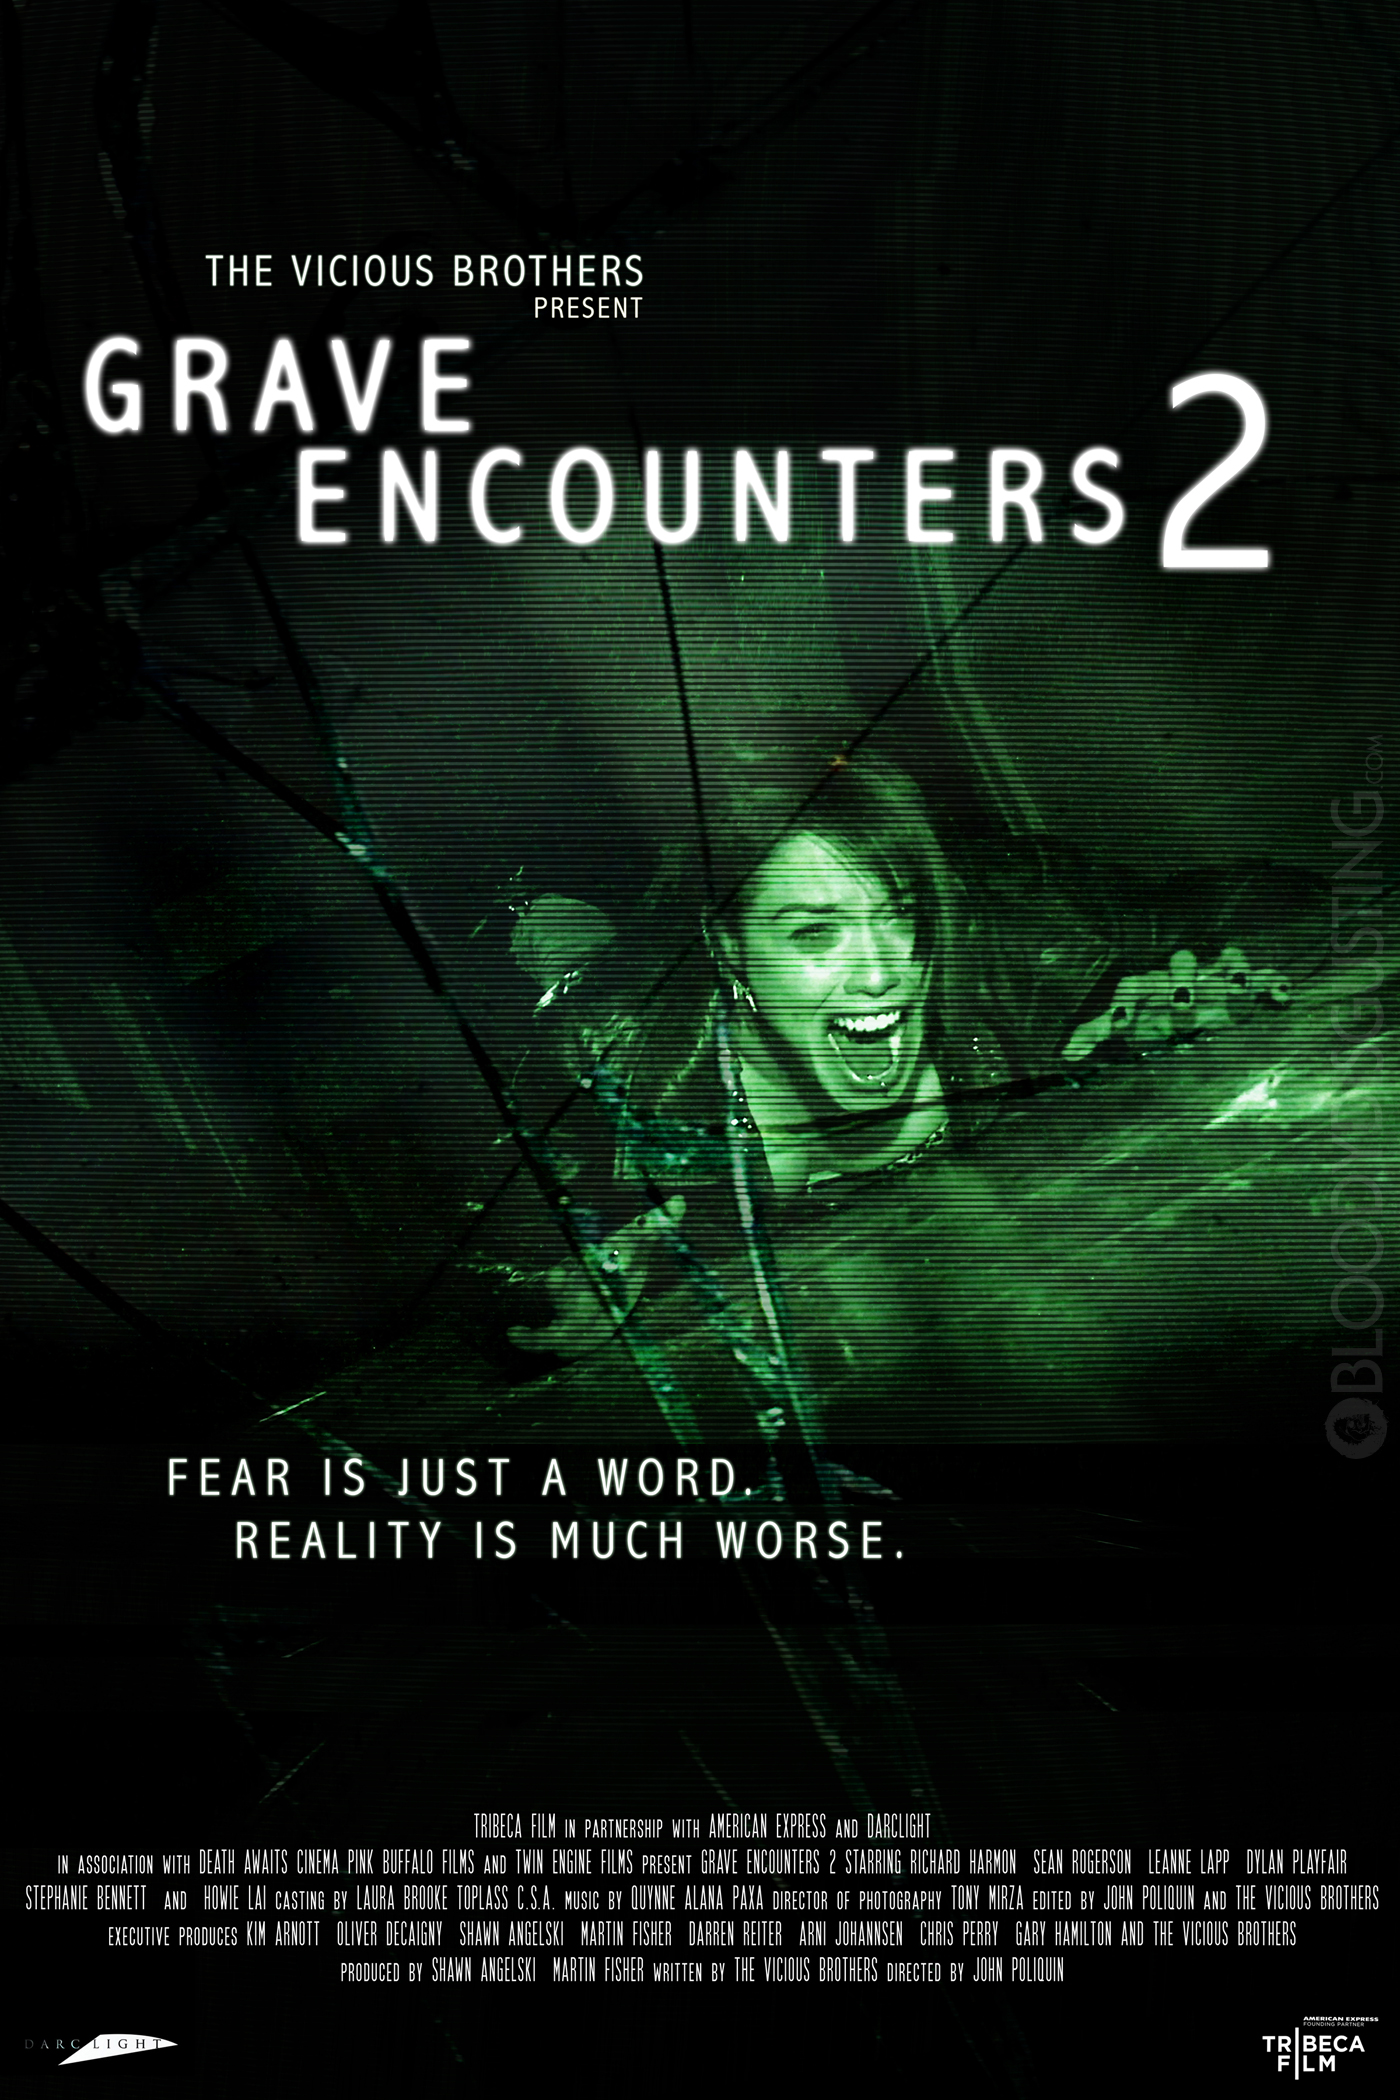 Alternate Grave Encounters 2 Poster Premiere Delivers Reality Of Fear